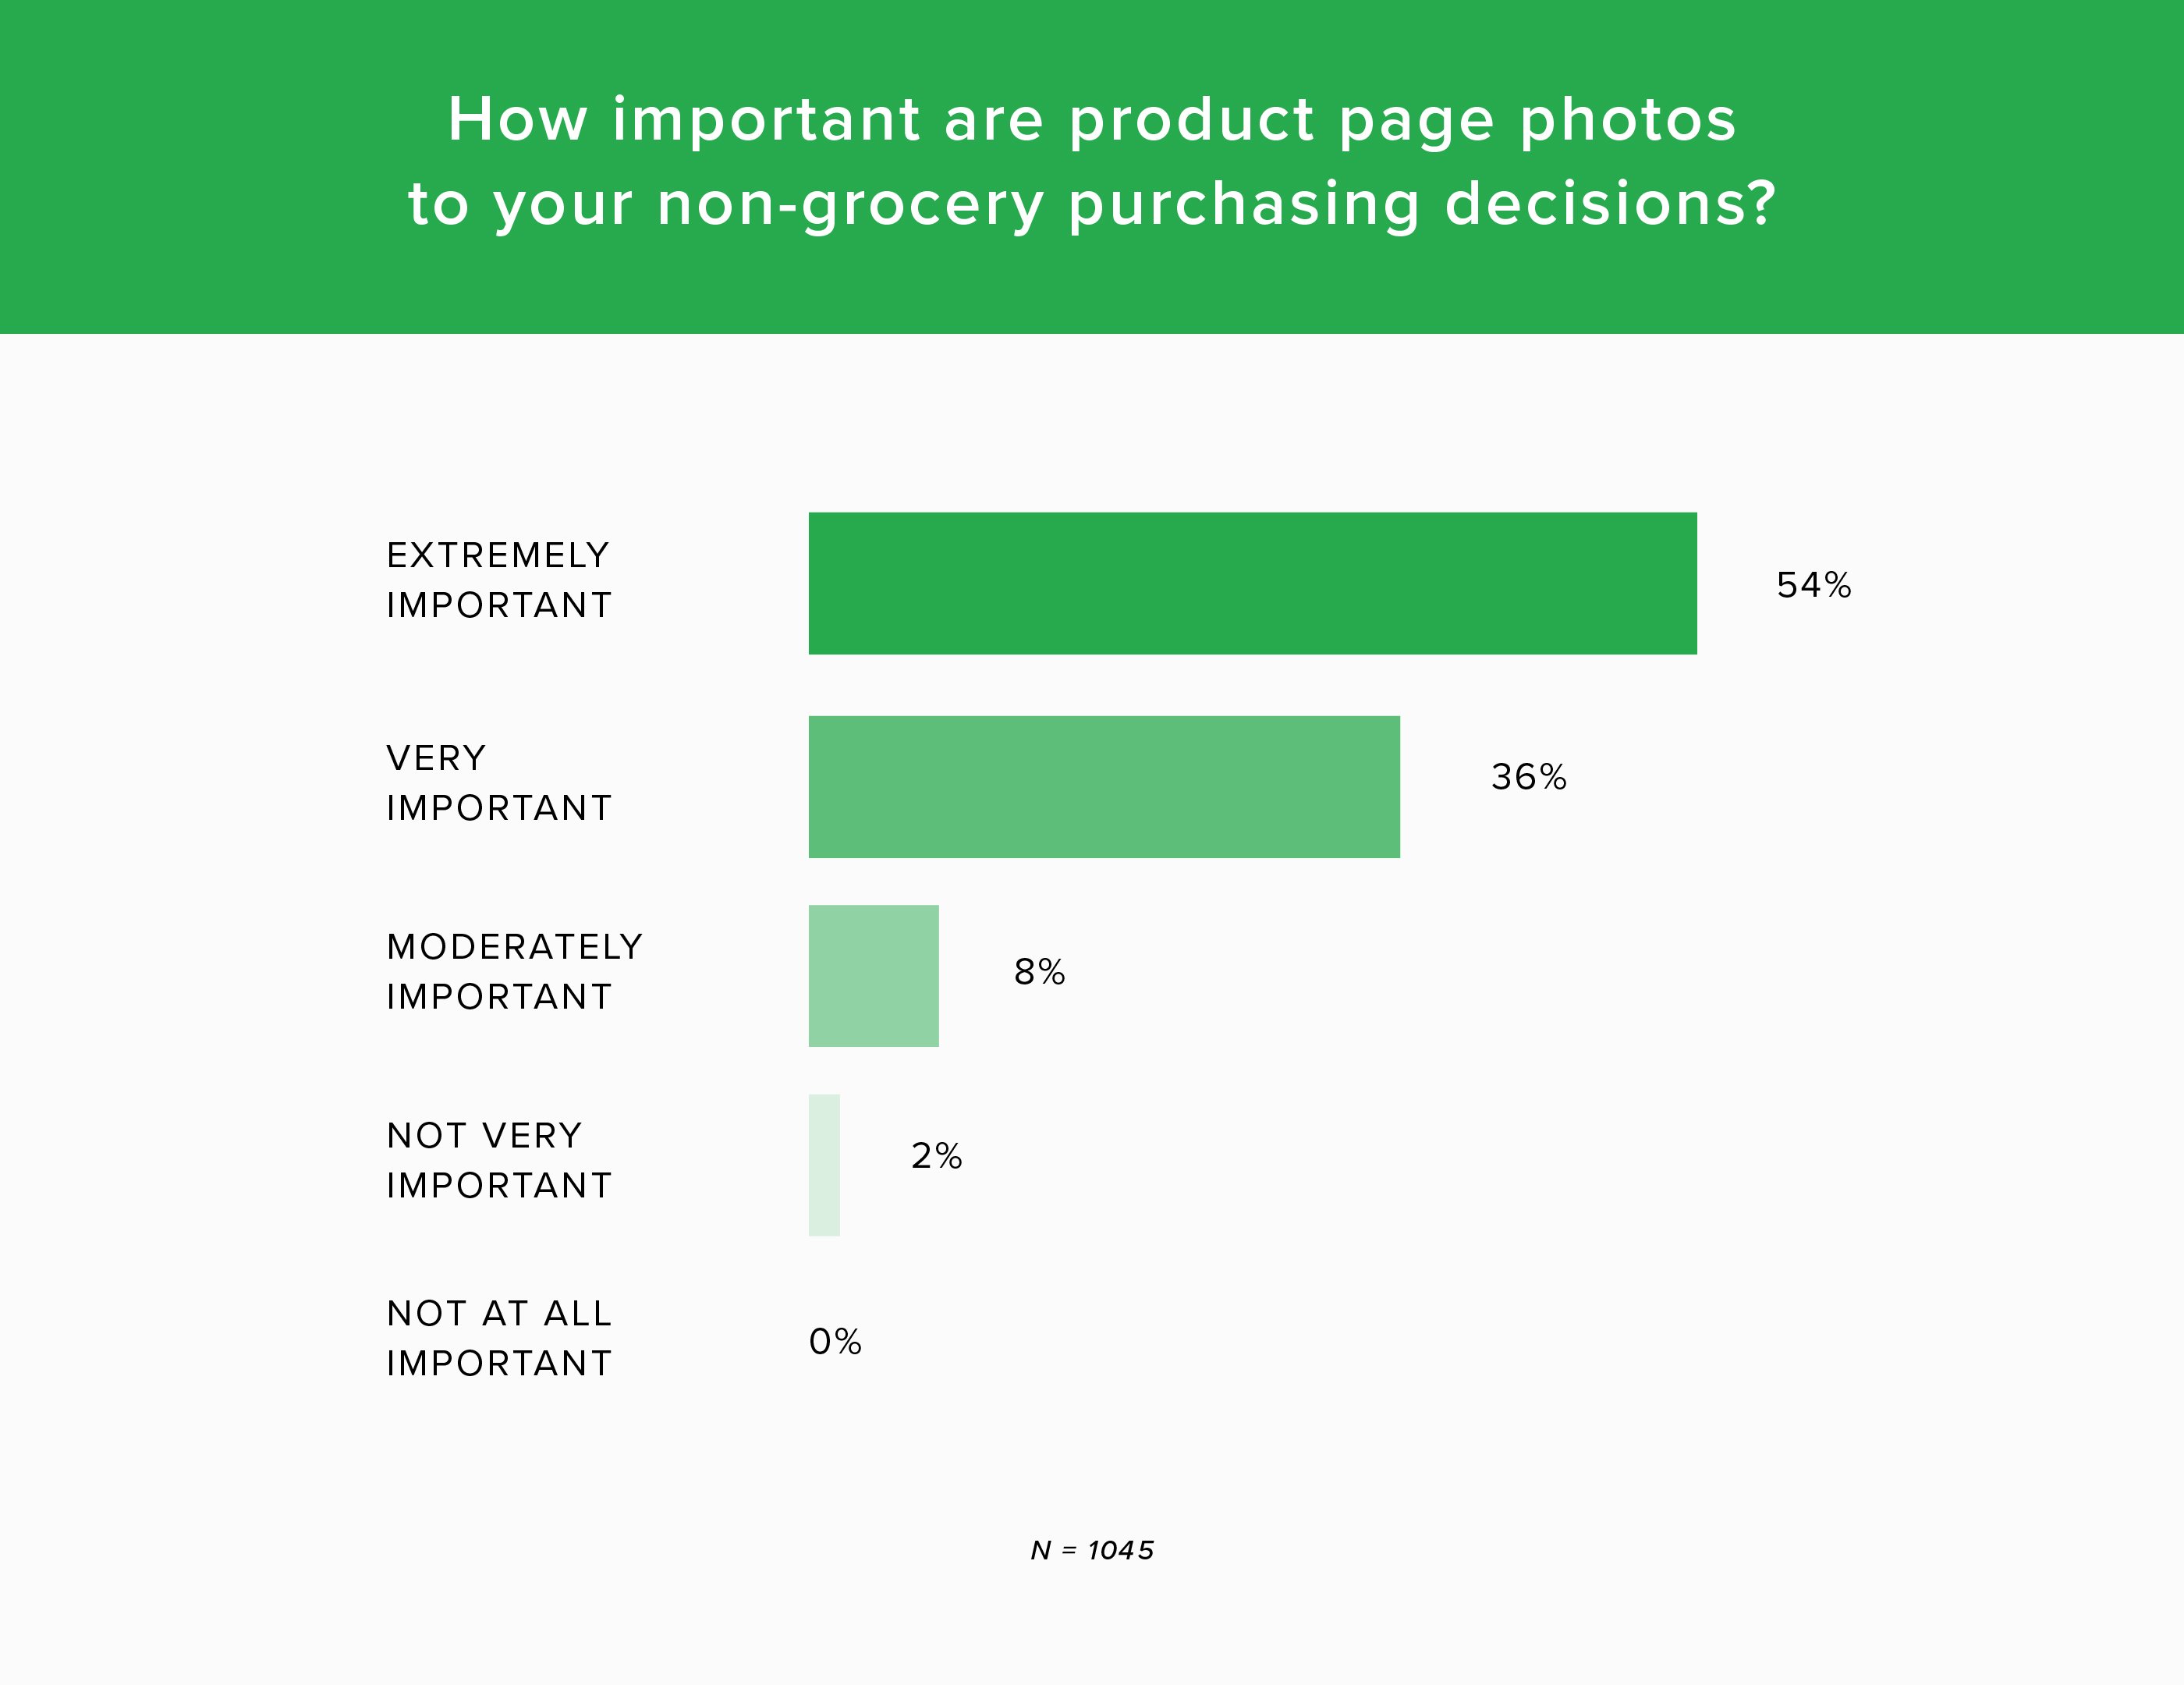 How important are product page photos to your non-grocery purchasing decisions?